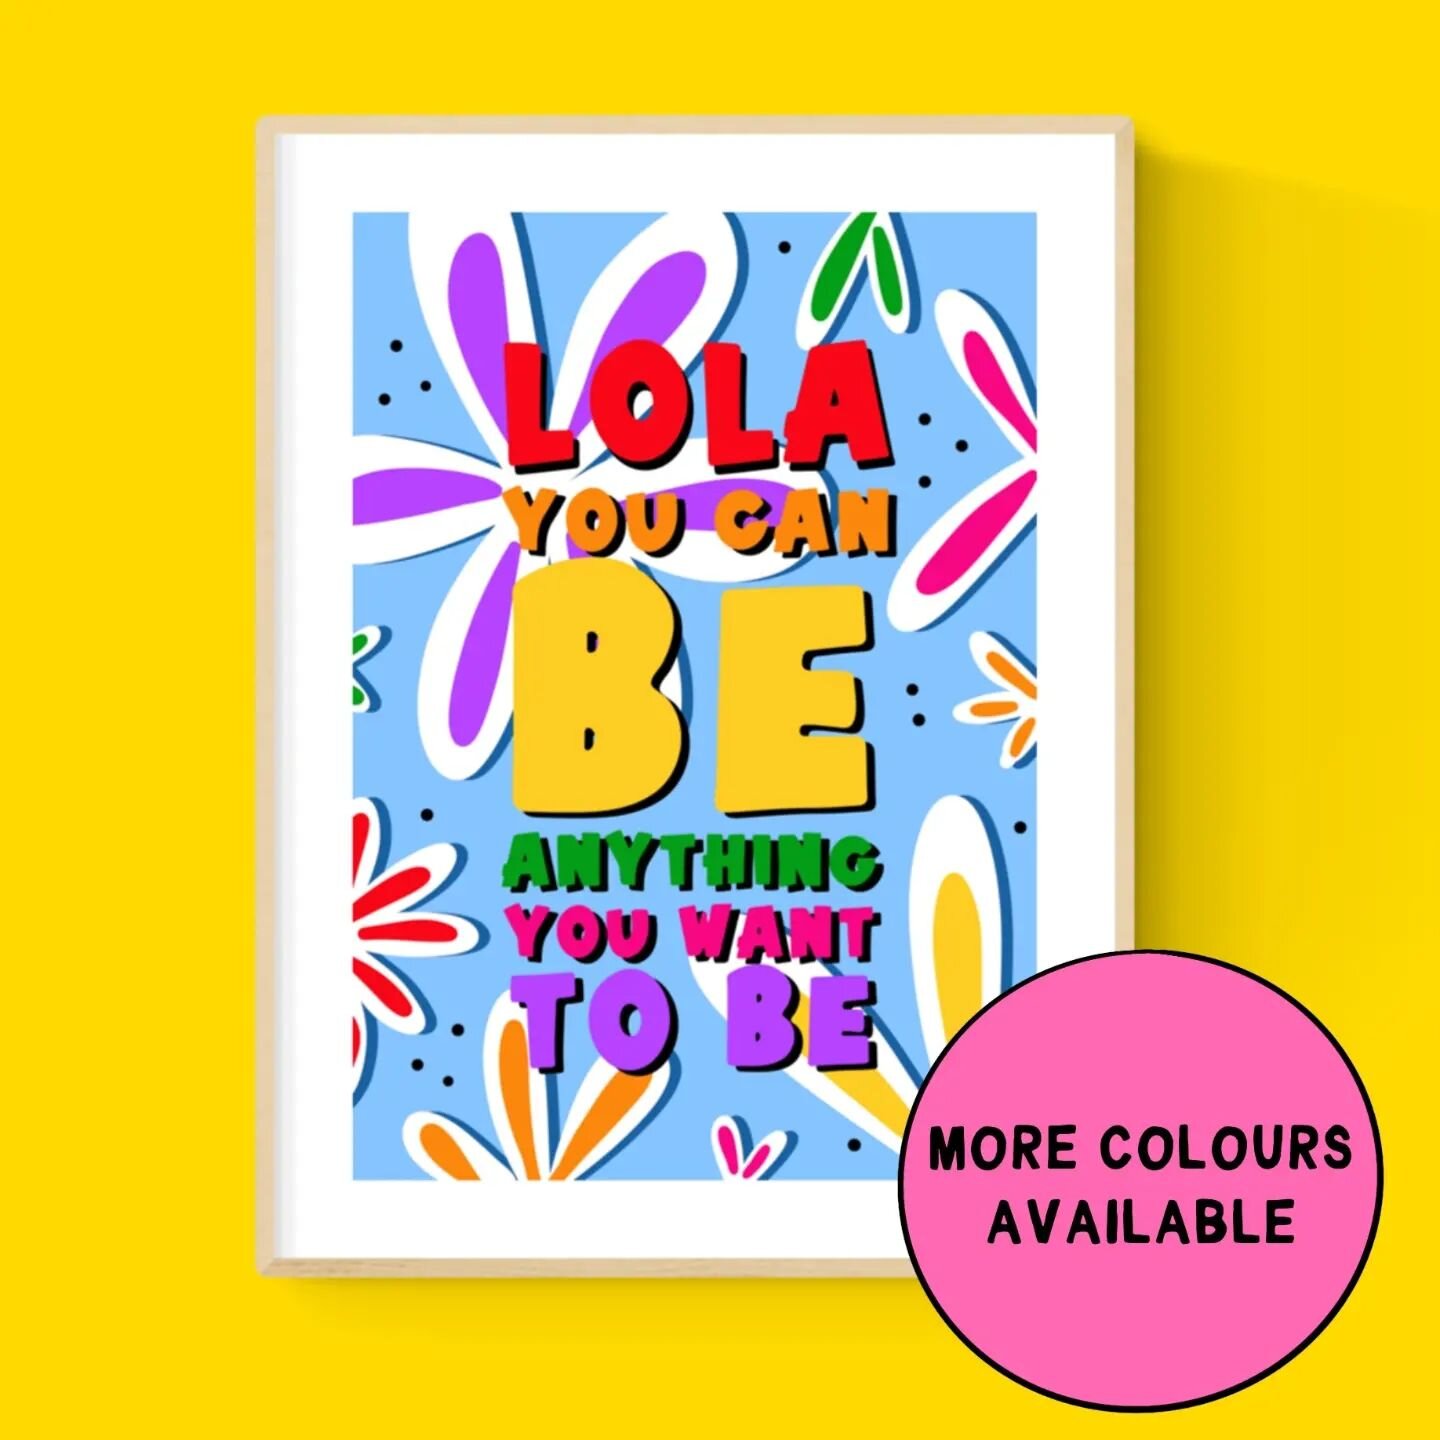 HEY, YOU! You can be anything you want to be. 🤟🏽

EM.POWER.HER ♀️

Personalised A4 prints available to purchase from Etsy and our website.

🌈Rainbow
💕Pinks
💛Pastels

Just &pound;5.00 including UK delivery. ⭐
.
.
.
.
#pocaandpan #kentbusiness #fe